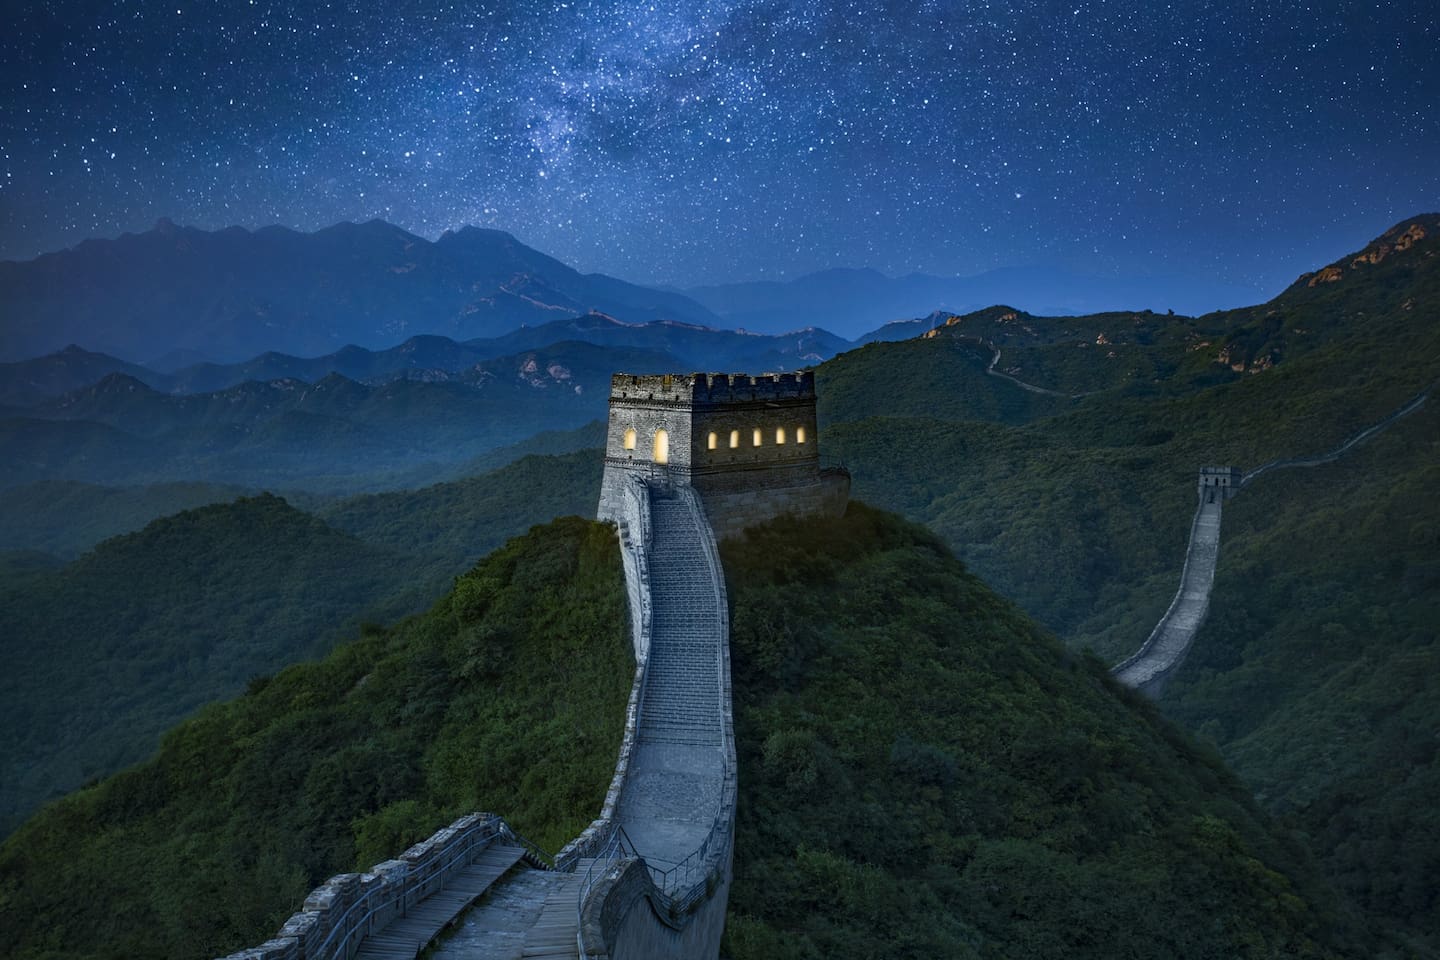 Spend a night on the Great Wall of China for free thanks to Airbnb